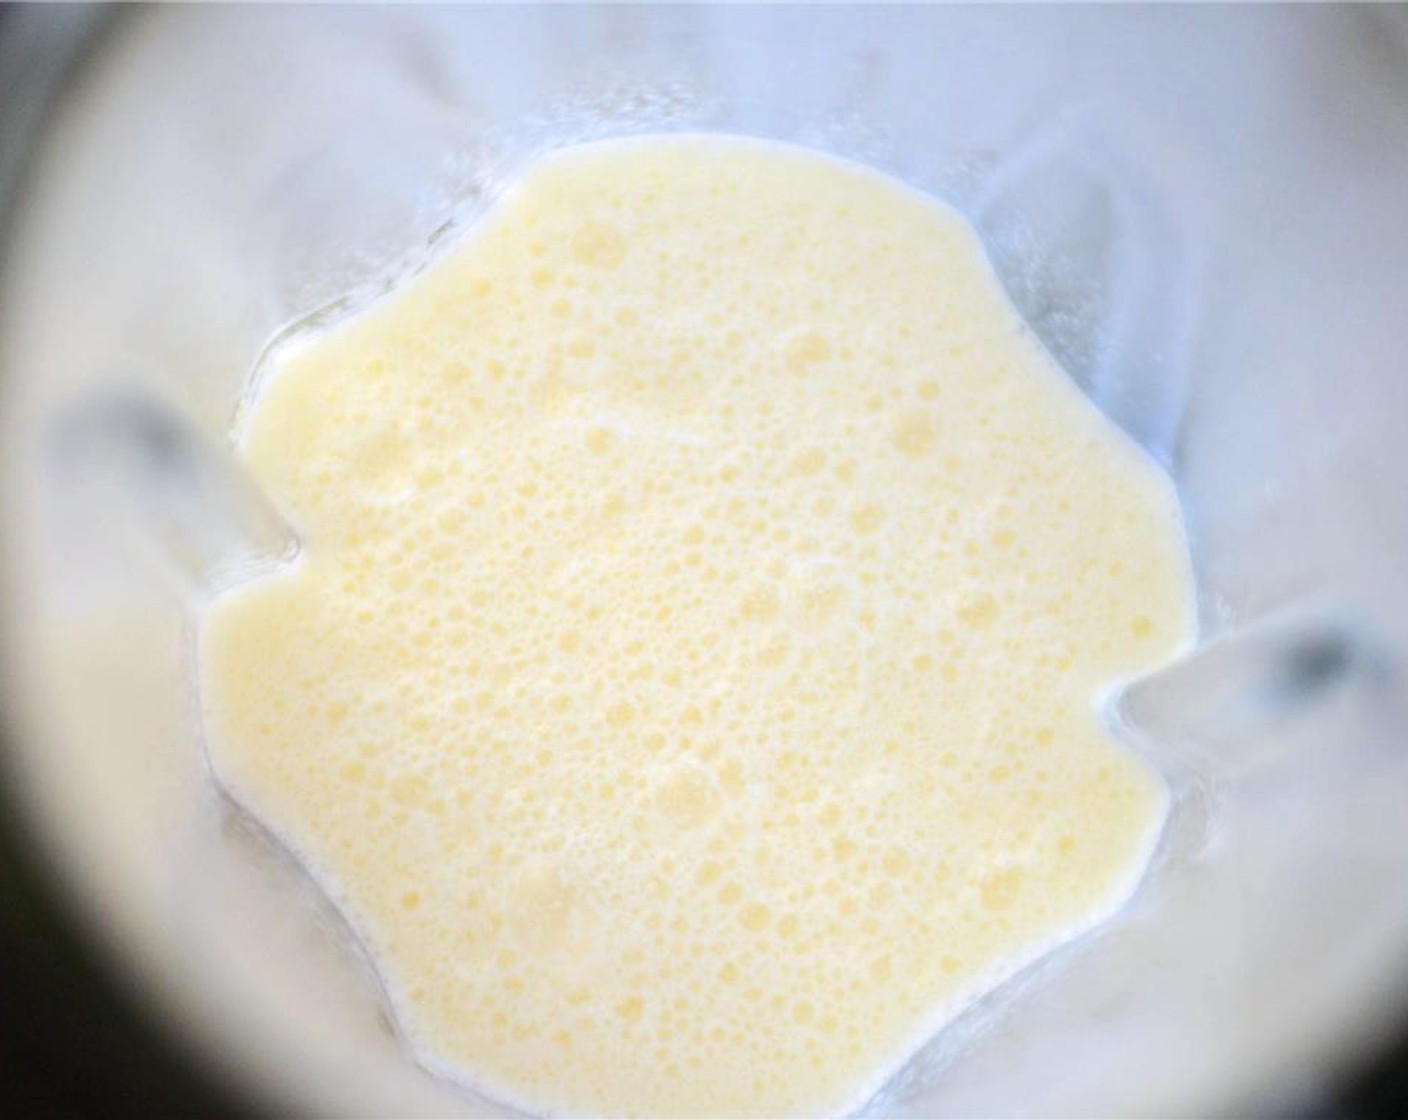 step 2 In a blender, combine whole Milk (1 cup), Farmhouse Eggs® Large Brown Eggs (2) and 1 tablespoon of cooled, melted butter. Blend until combined.